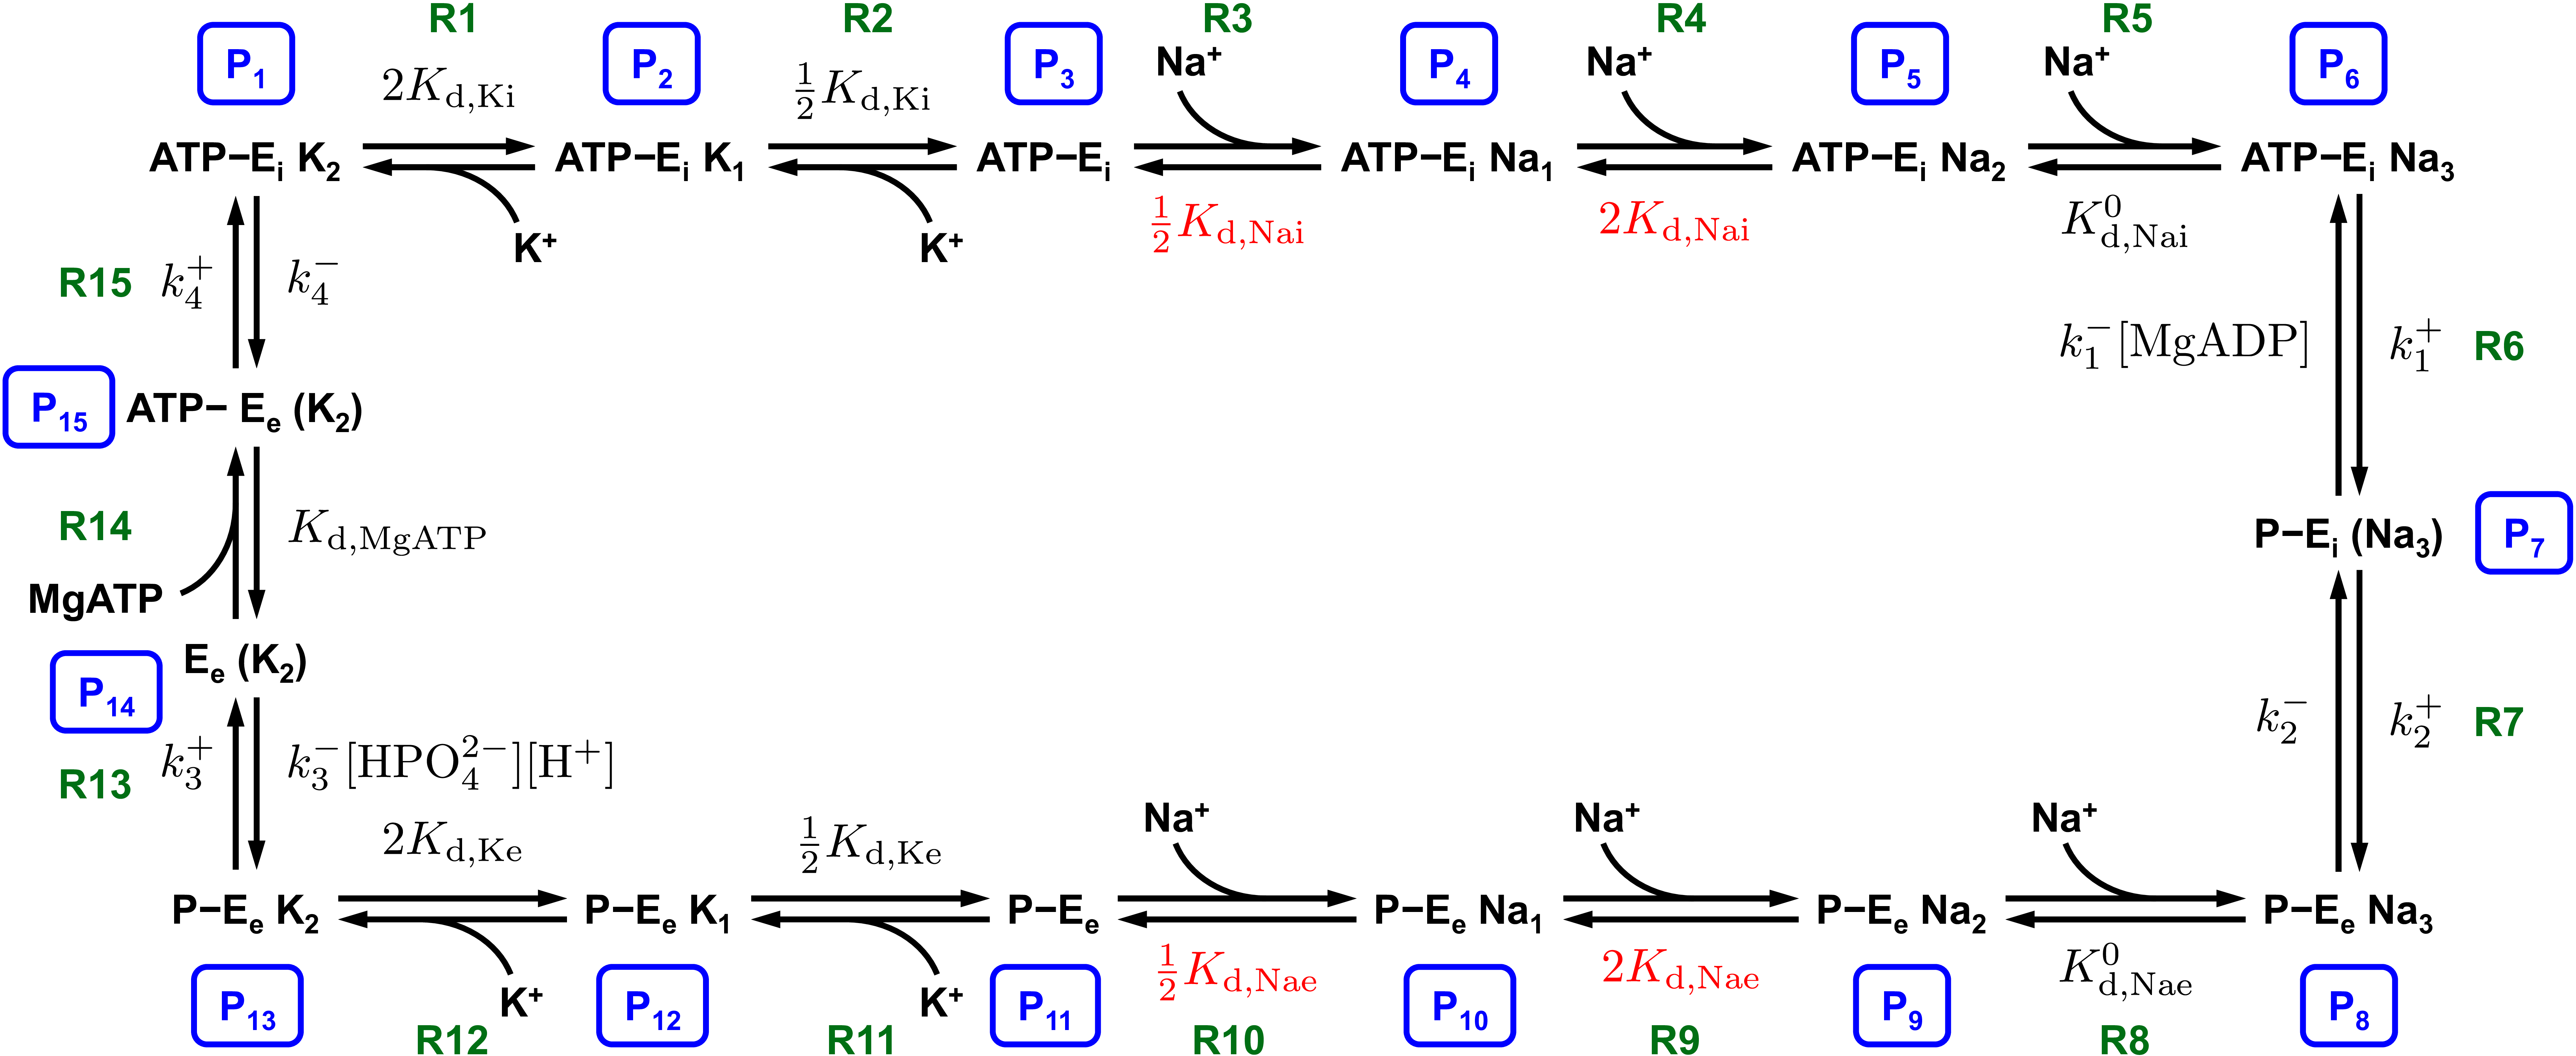 Reaction scheme of the cardiac Na^+/K^+ ATPase model. Numbers for each pump state (blue boxes) and reaction names (green) are labelled, with corrected parameters shown in red.